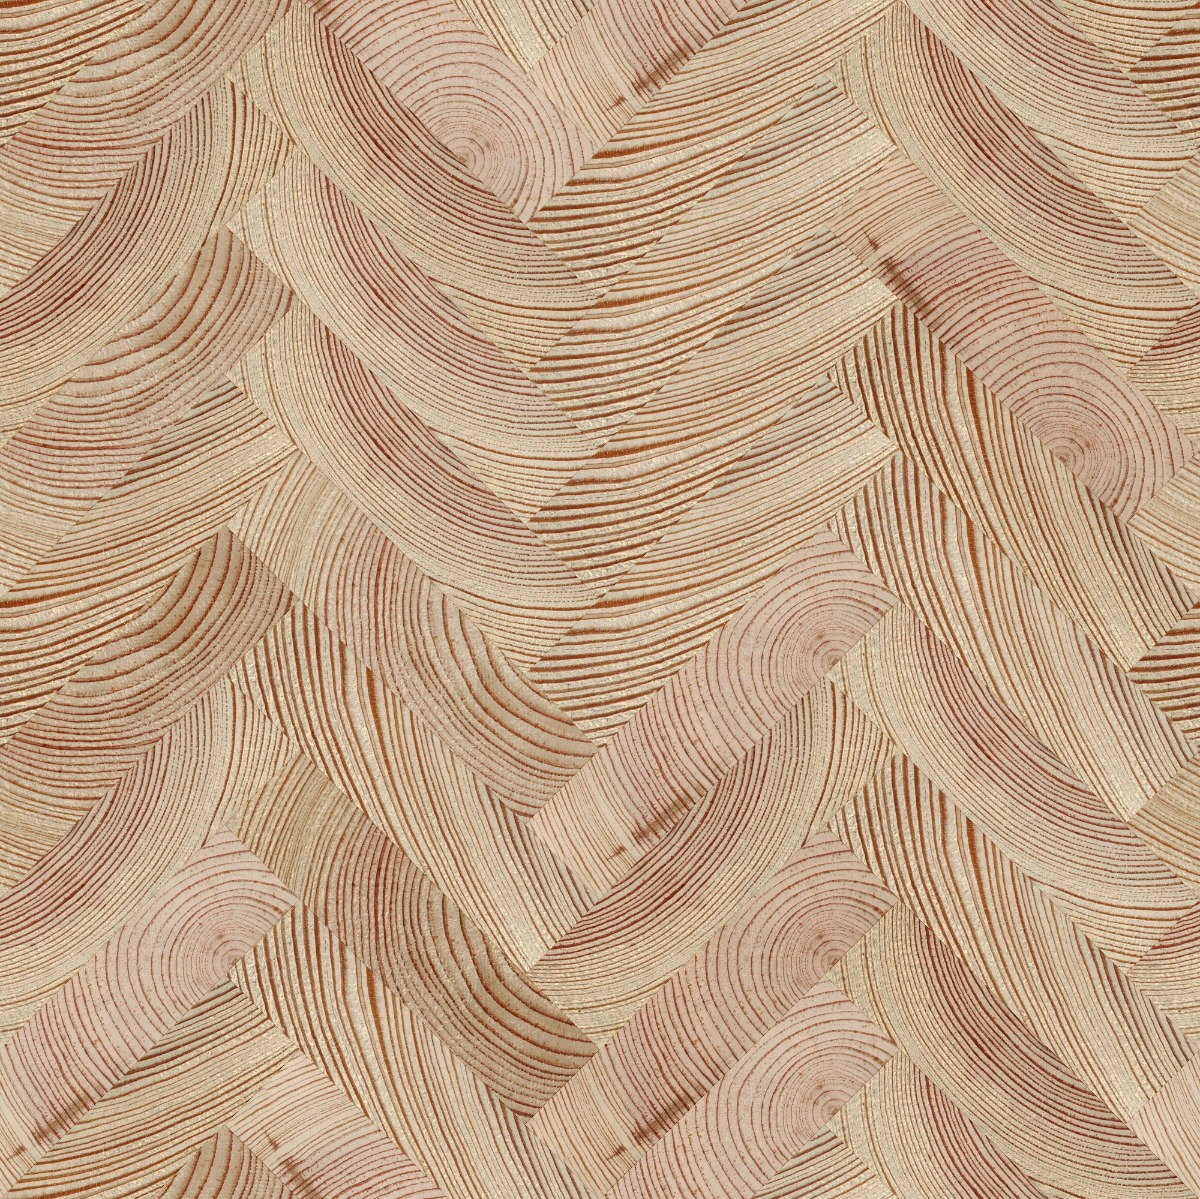 A seamless wood texture with timber end grain boards arranged in a Herringbone pattern